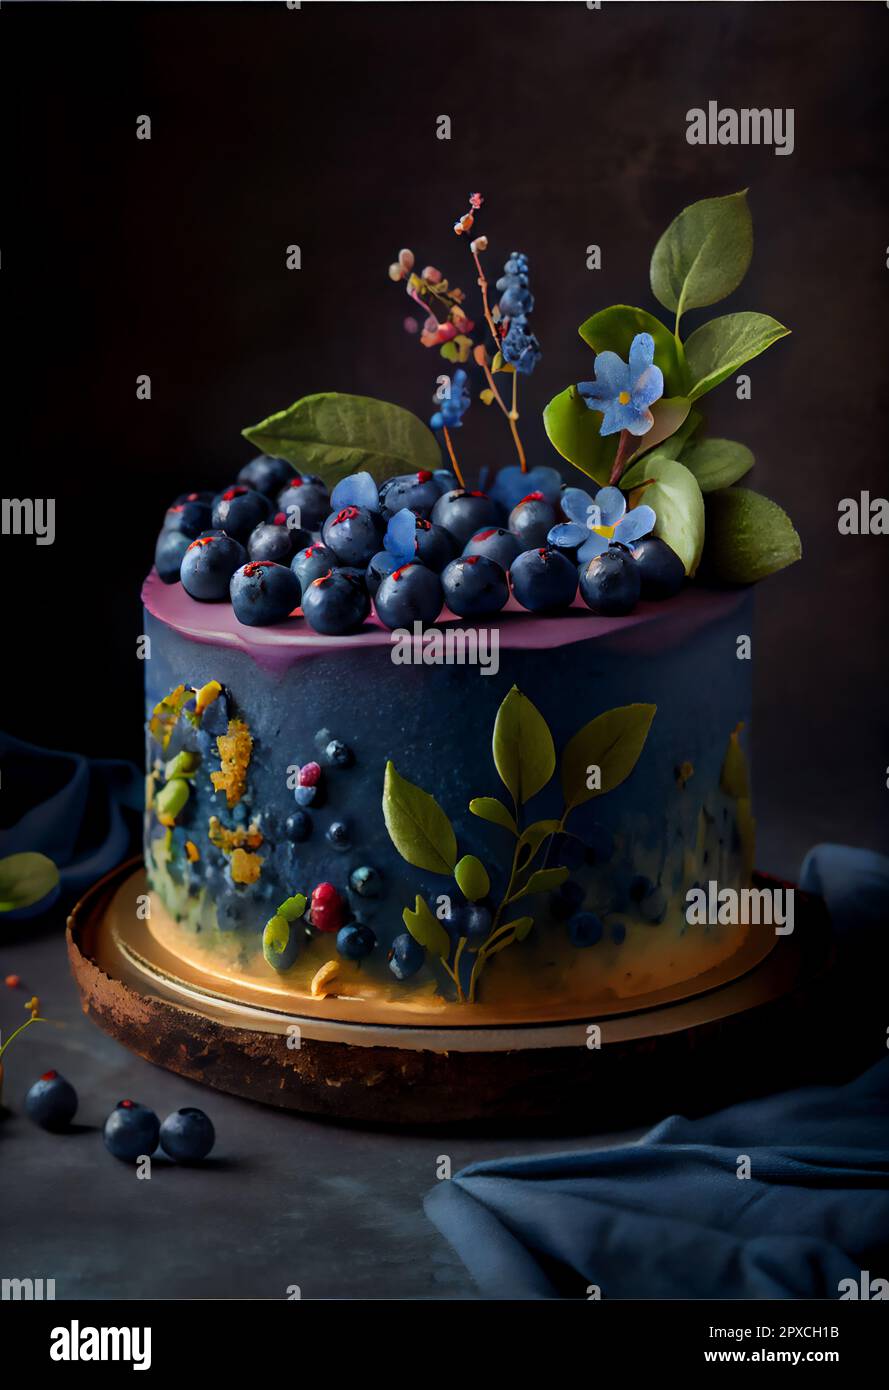 Realistic cake decorated with blueberries and flower, 3D illustration Stock Photo